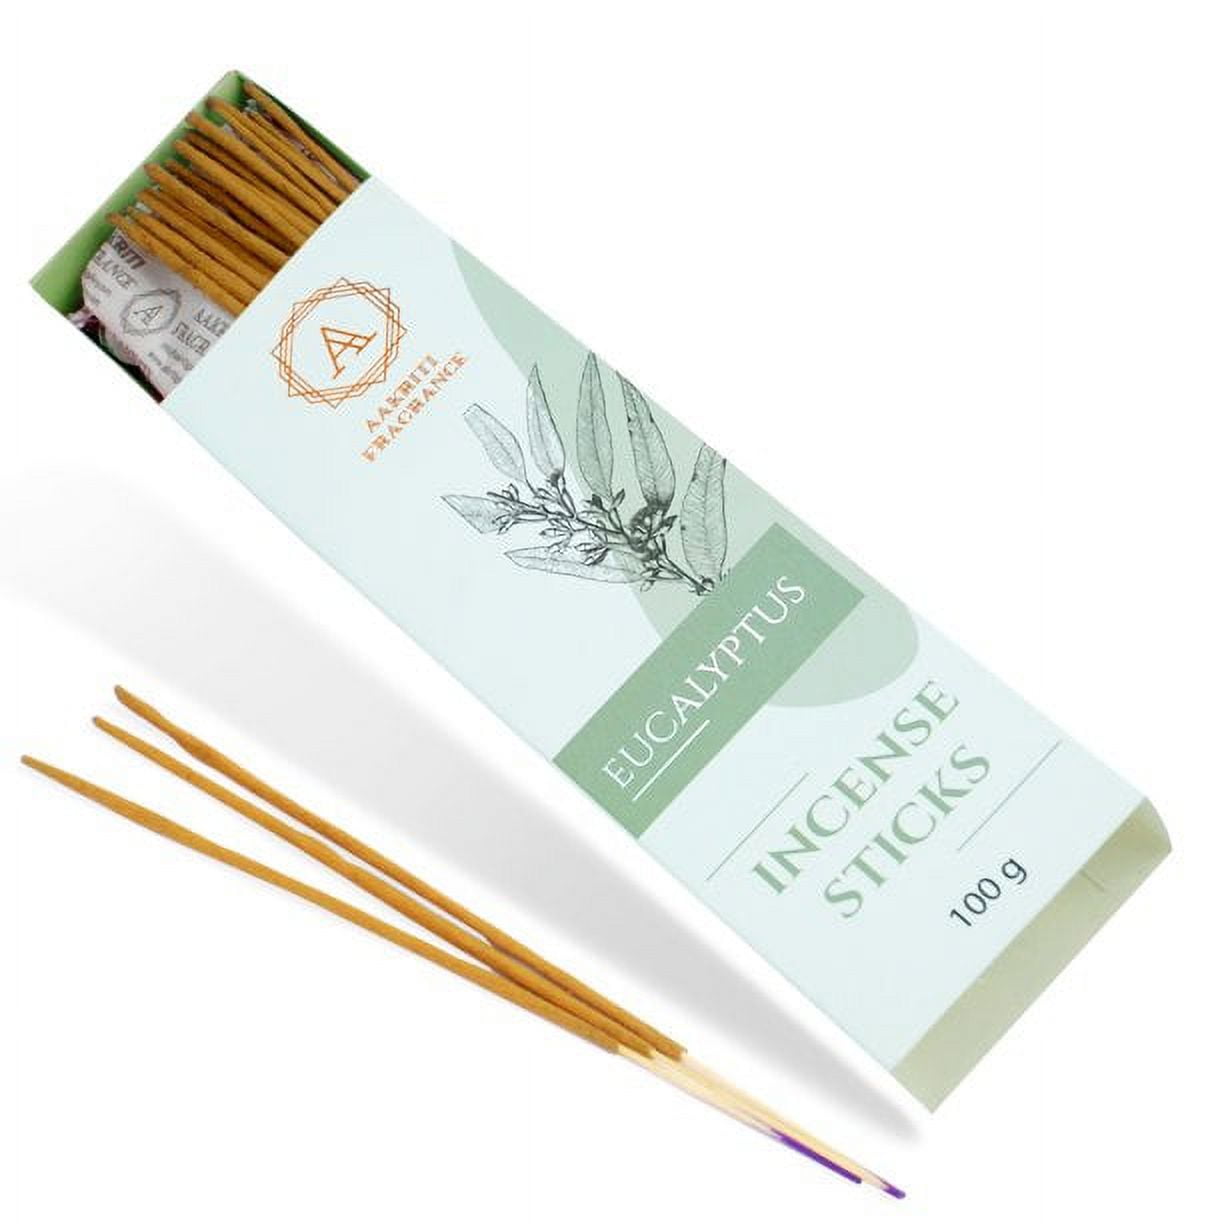 Marbling ~ Spice Lumiere ~ Incense Sticks (3 Pack Total of 30 Gram)